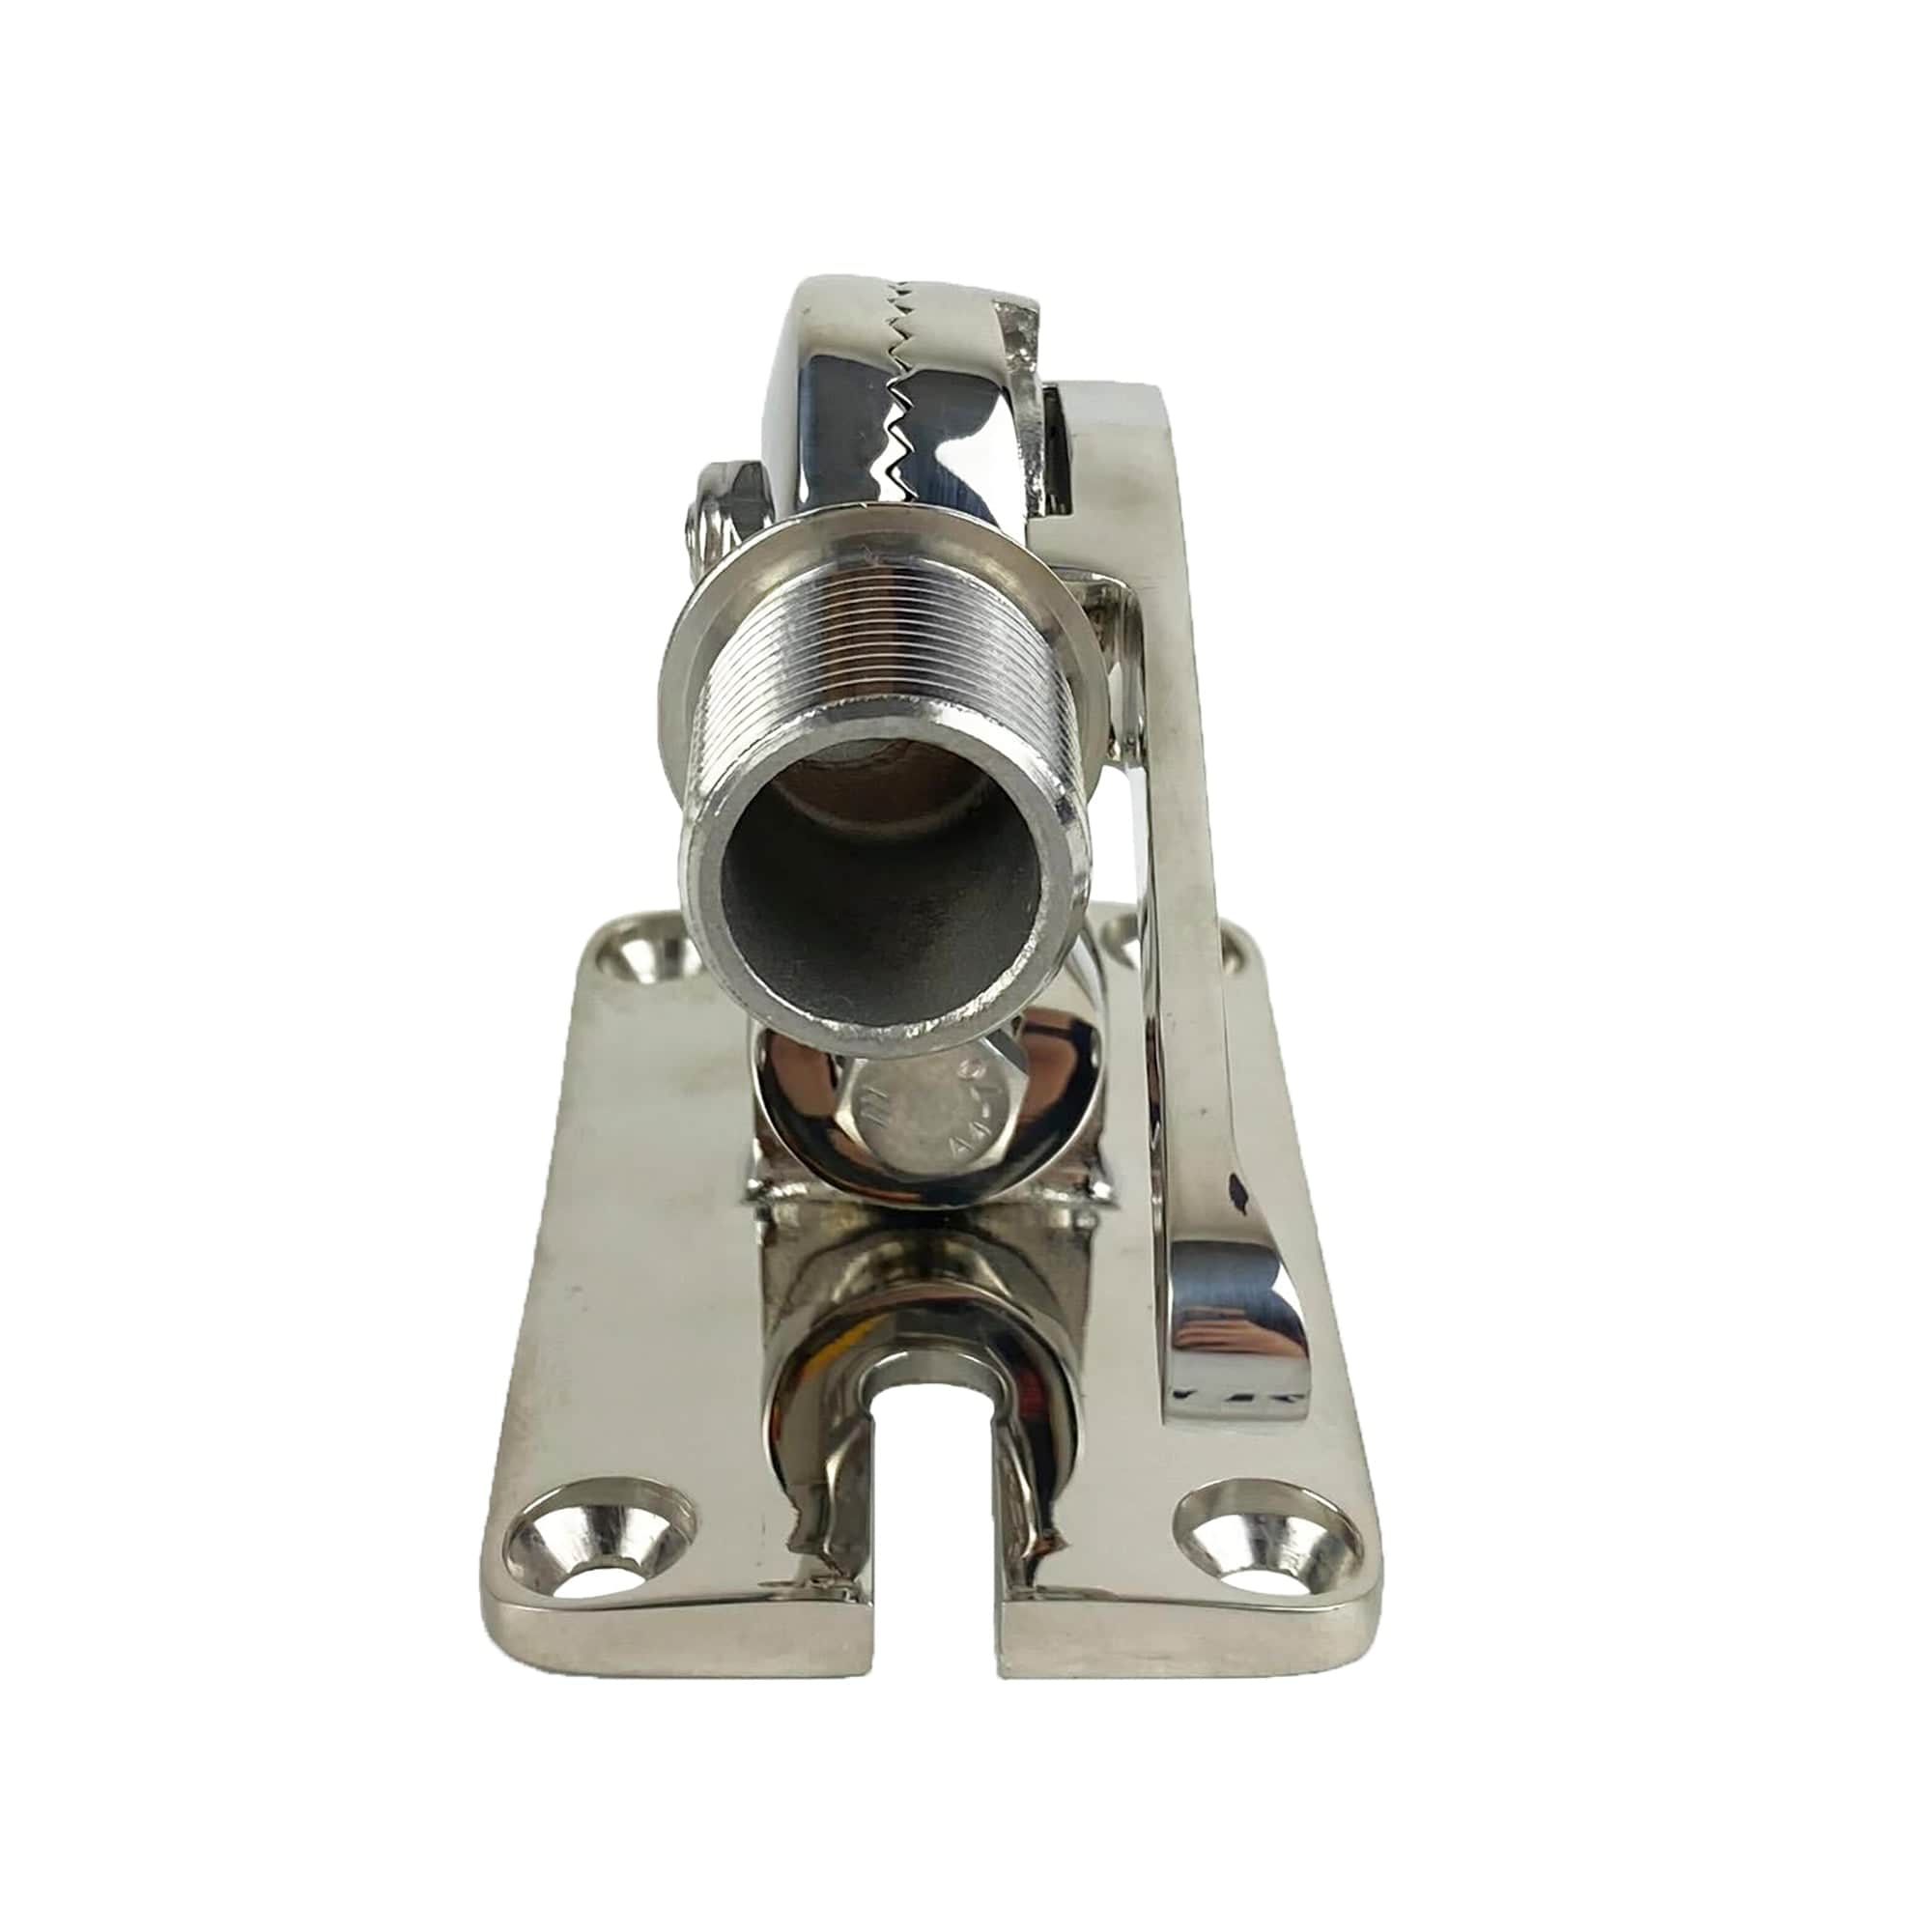 Low Profile 4-Way Stainless Steel Ratchet Mount (Bulk Pack) - Glomex RA166/00-B